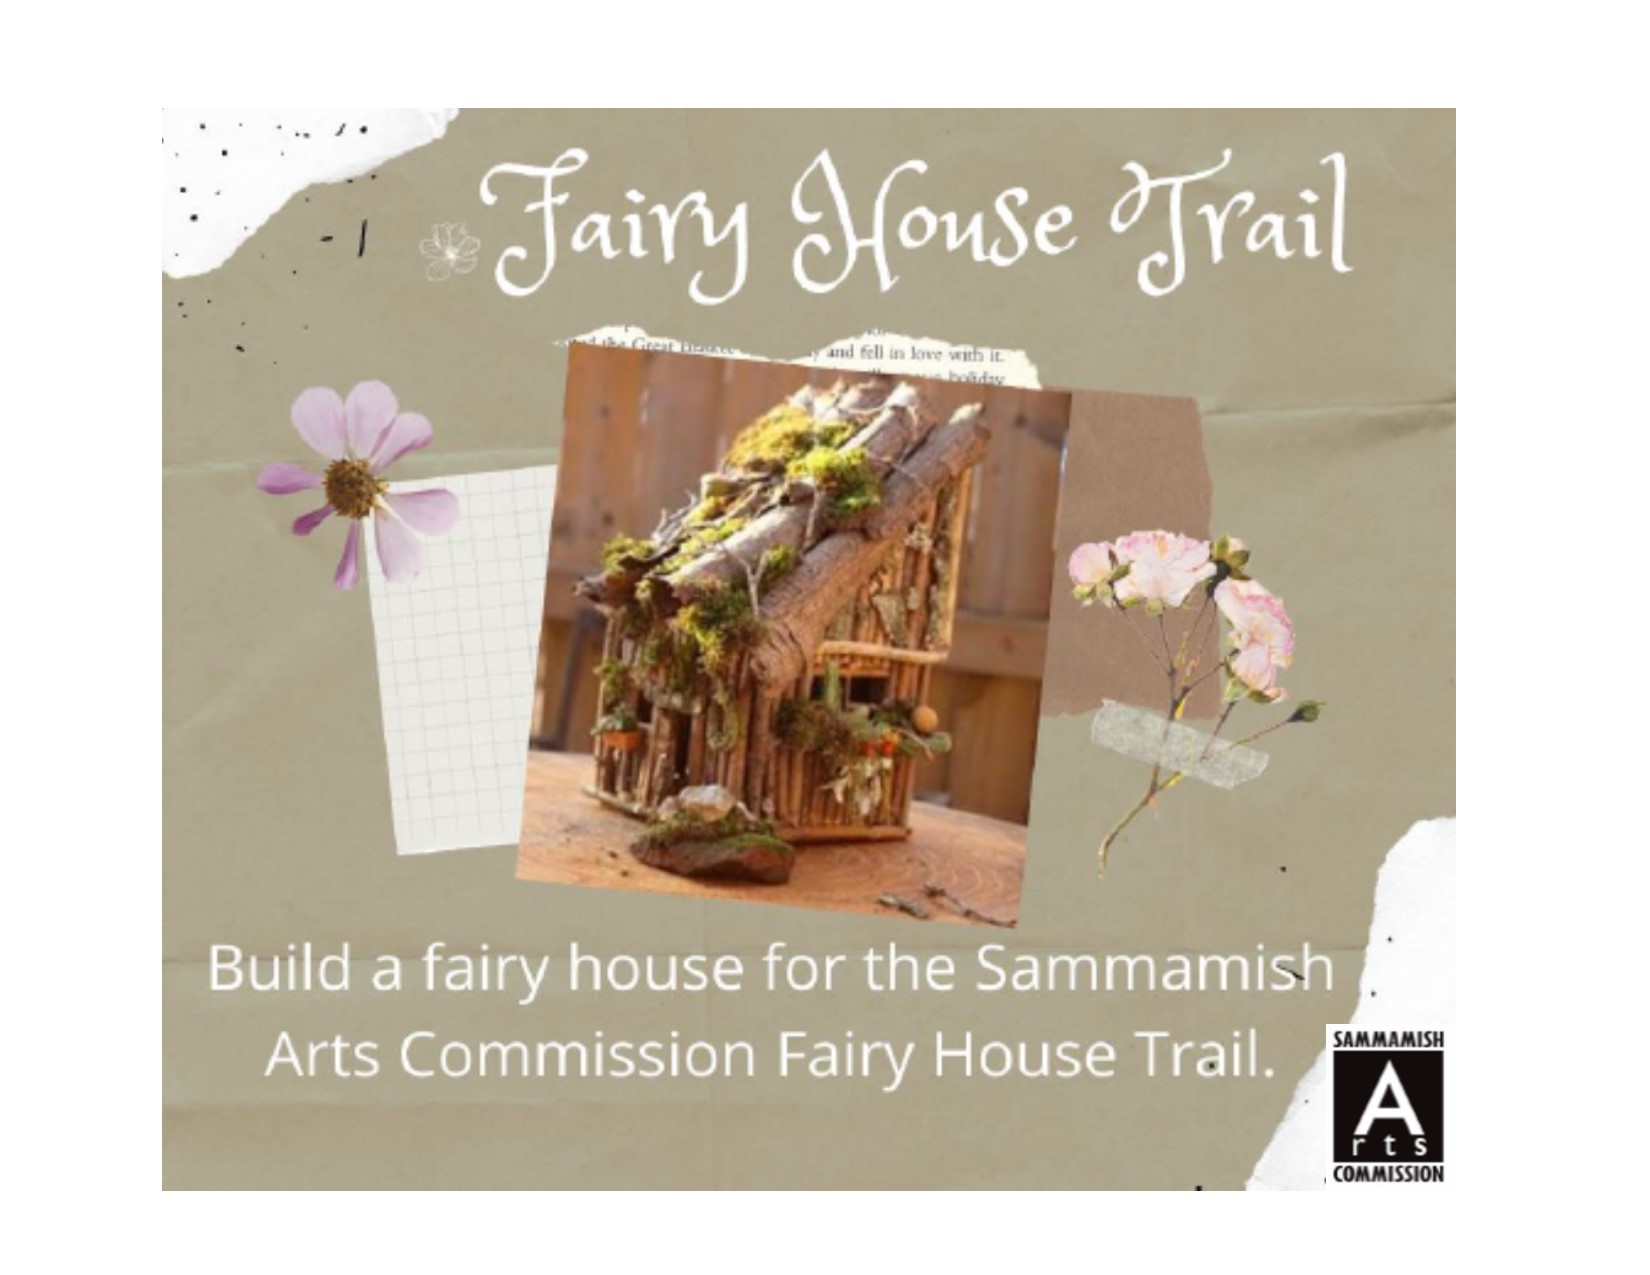 Build a fairy house for the Sammamish Arts Commission Fairy House Trail.